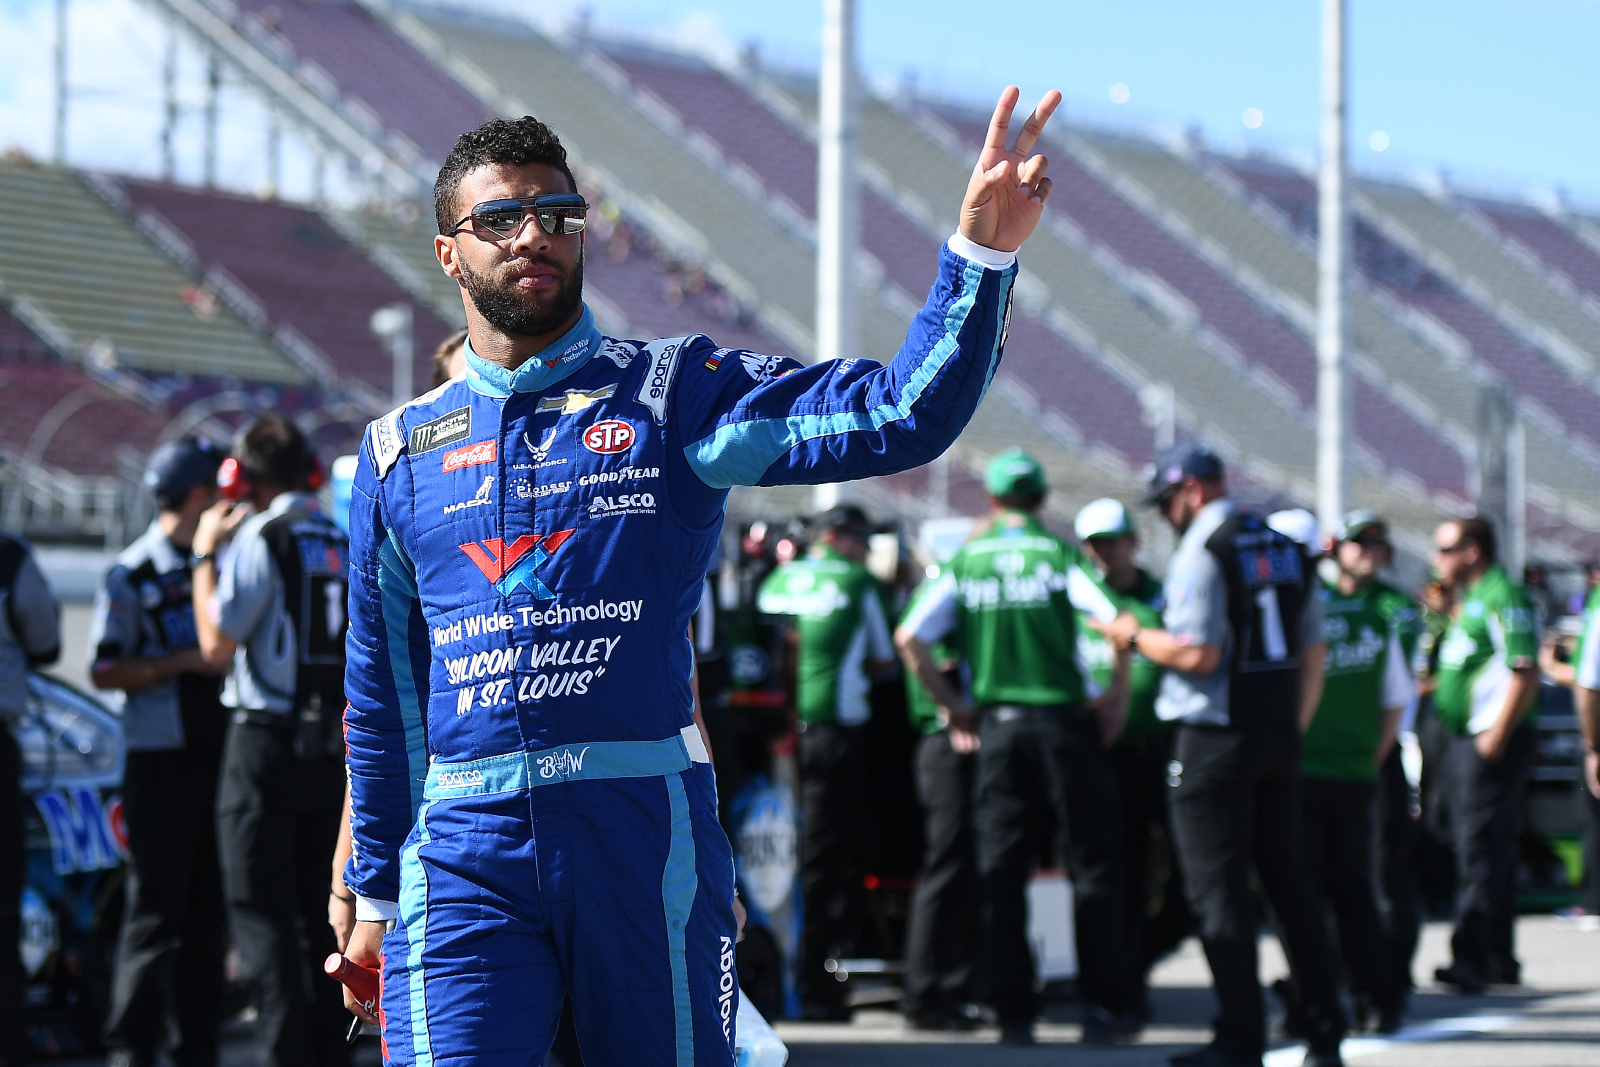 Bubba Wallace and Kyle Larson spoke after Larson used a racial slur earlier this year. Wallace recently opened up about their conversation.